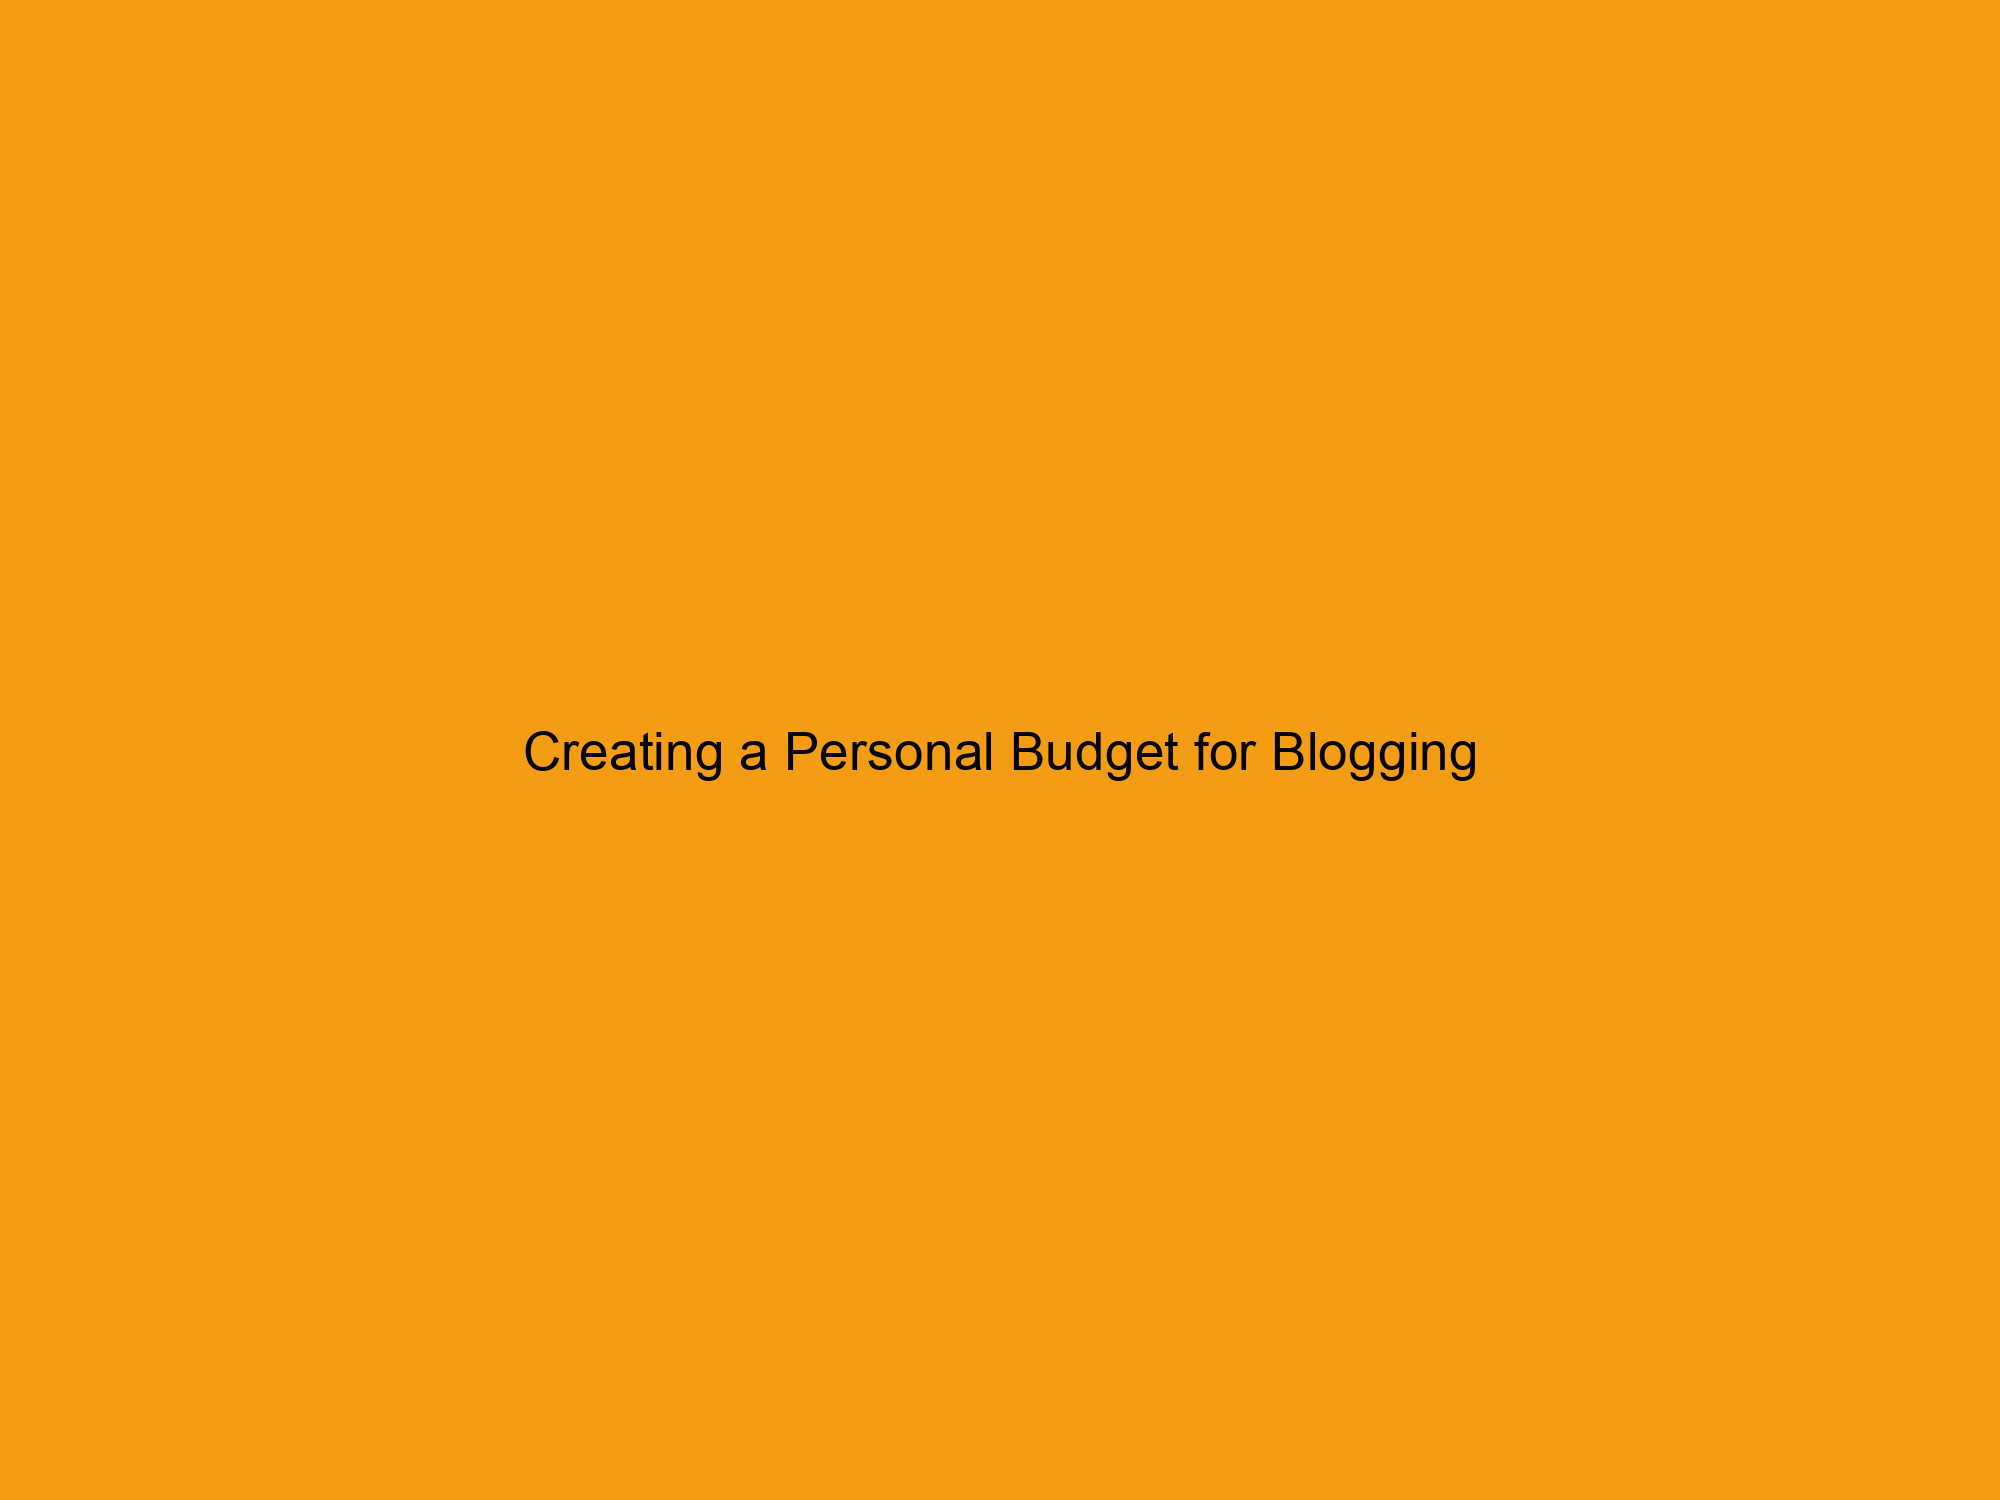 Creating a Personal Budget for Blogging